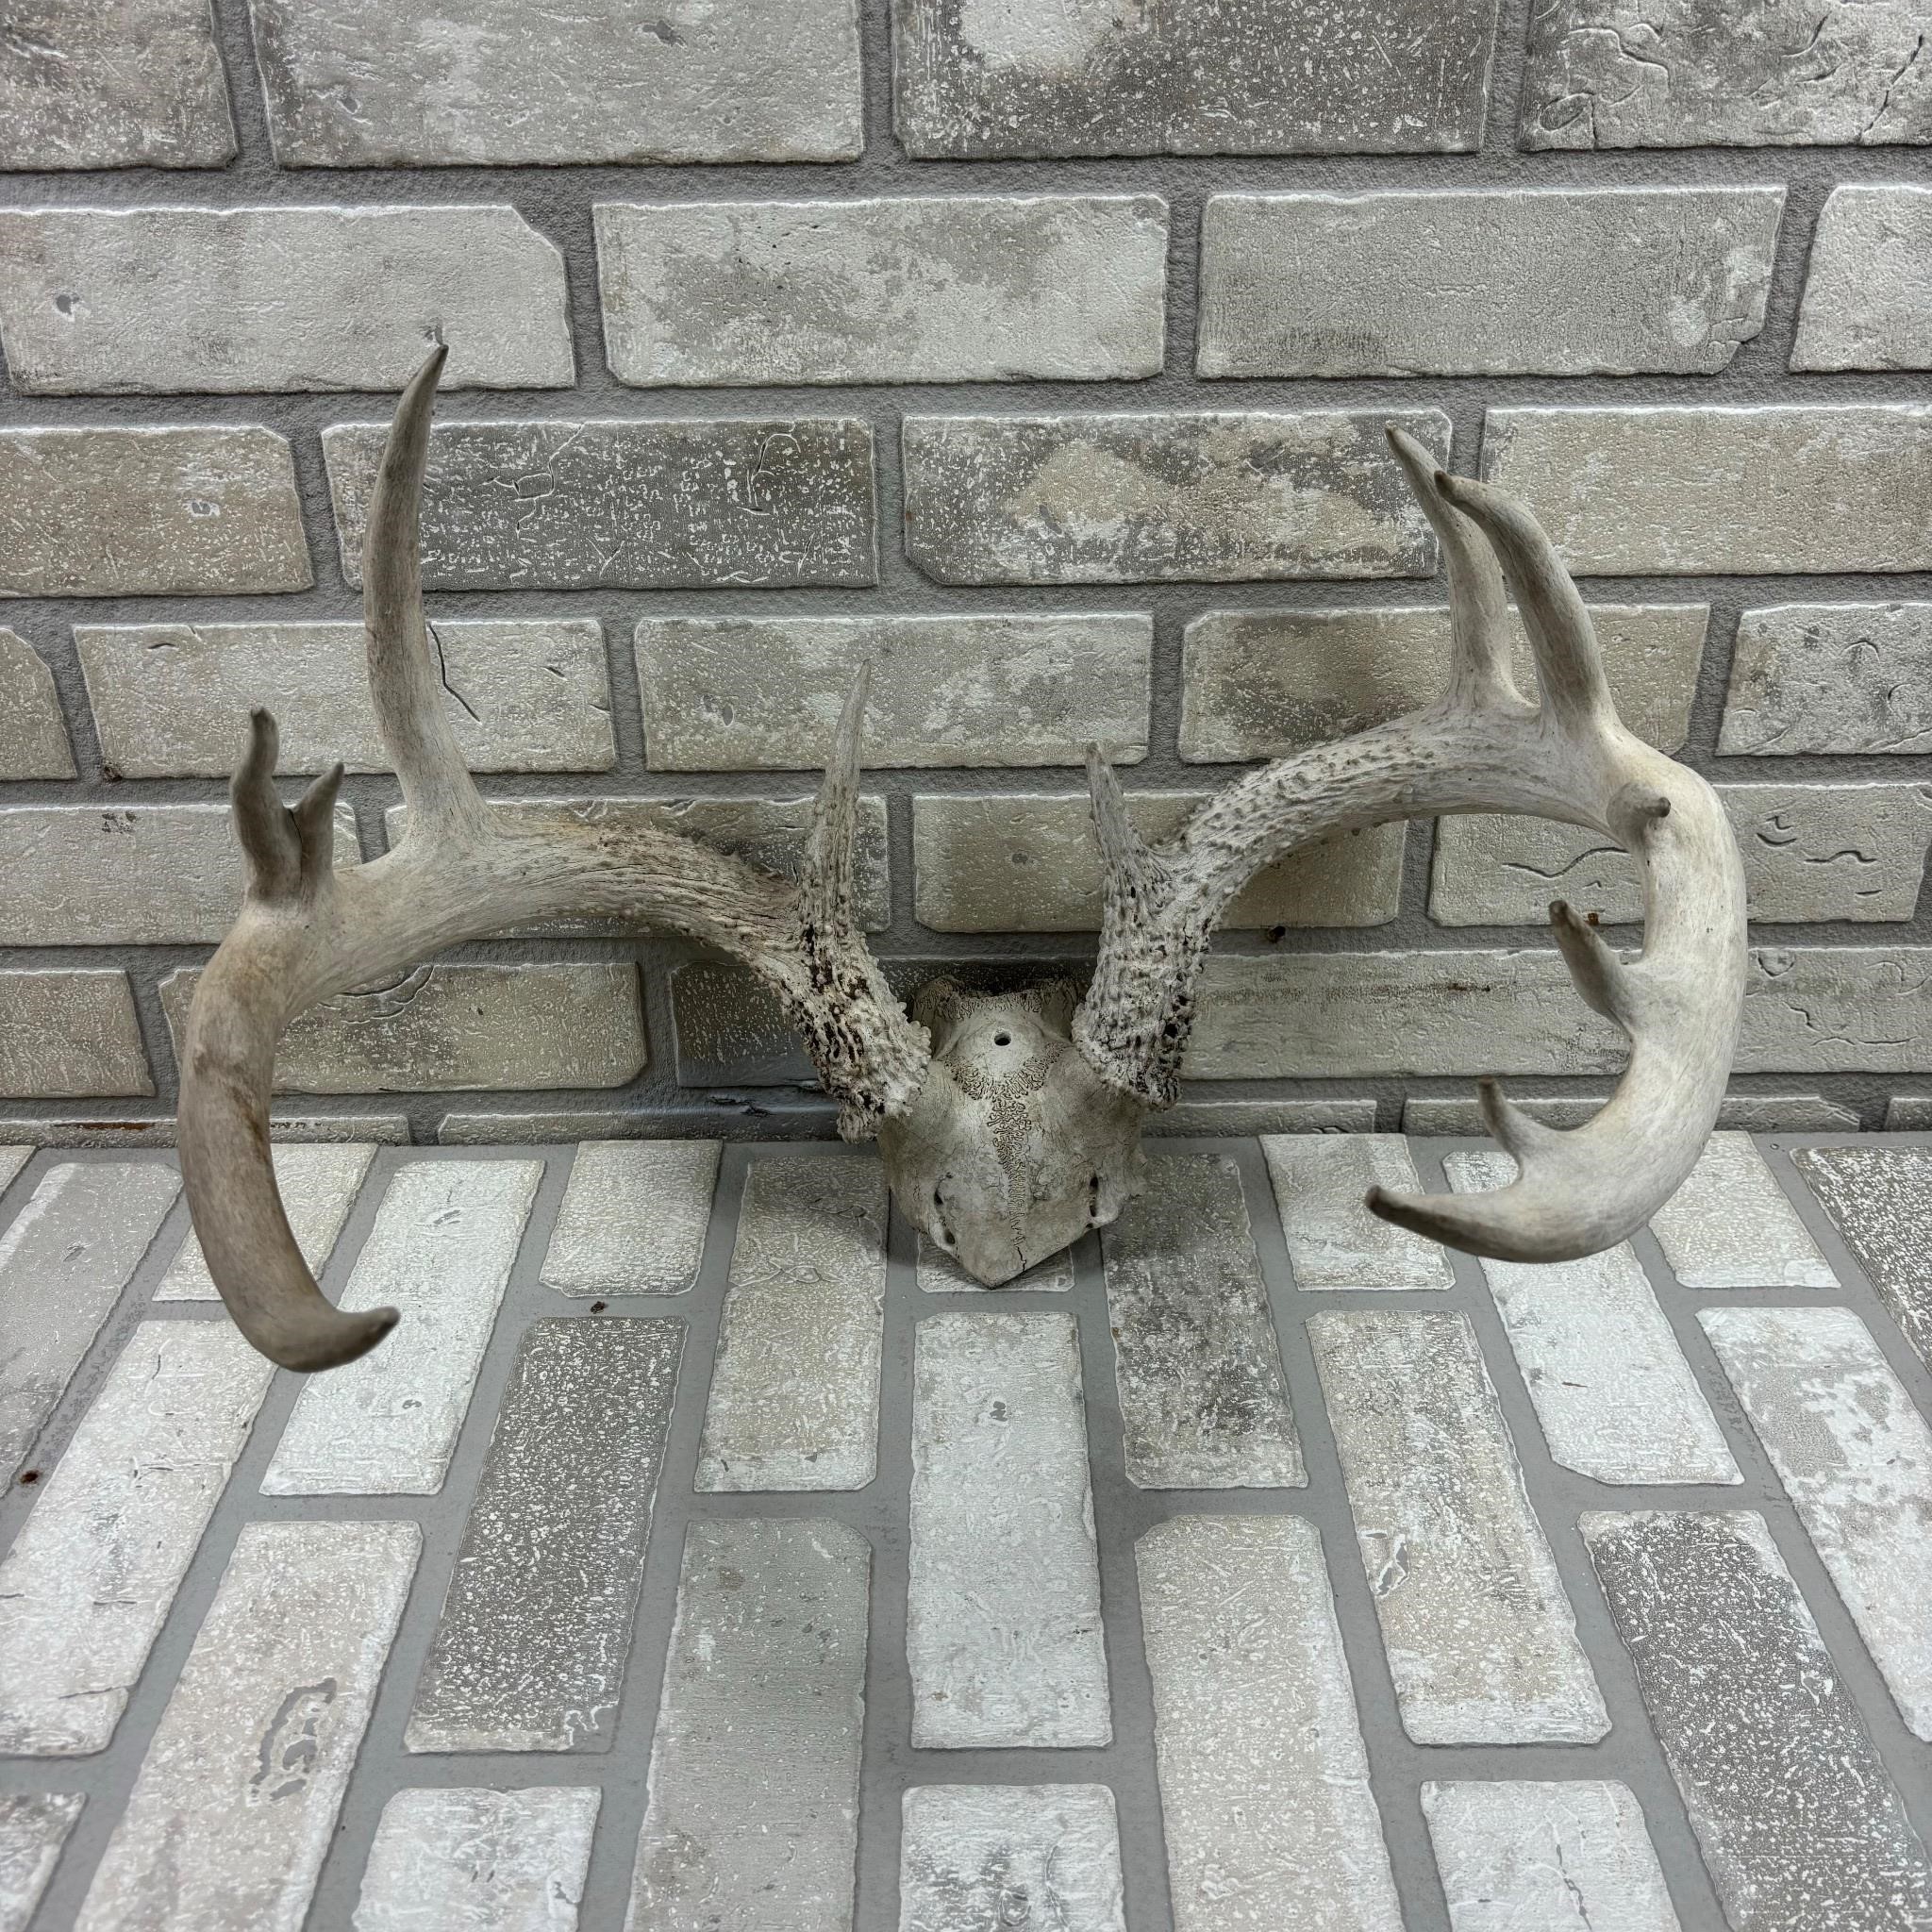 Deer Antlers, Non-typical